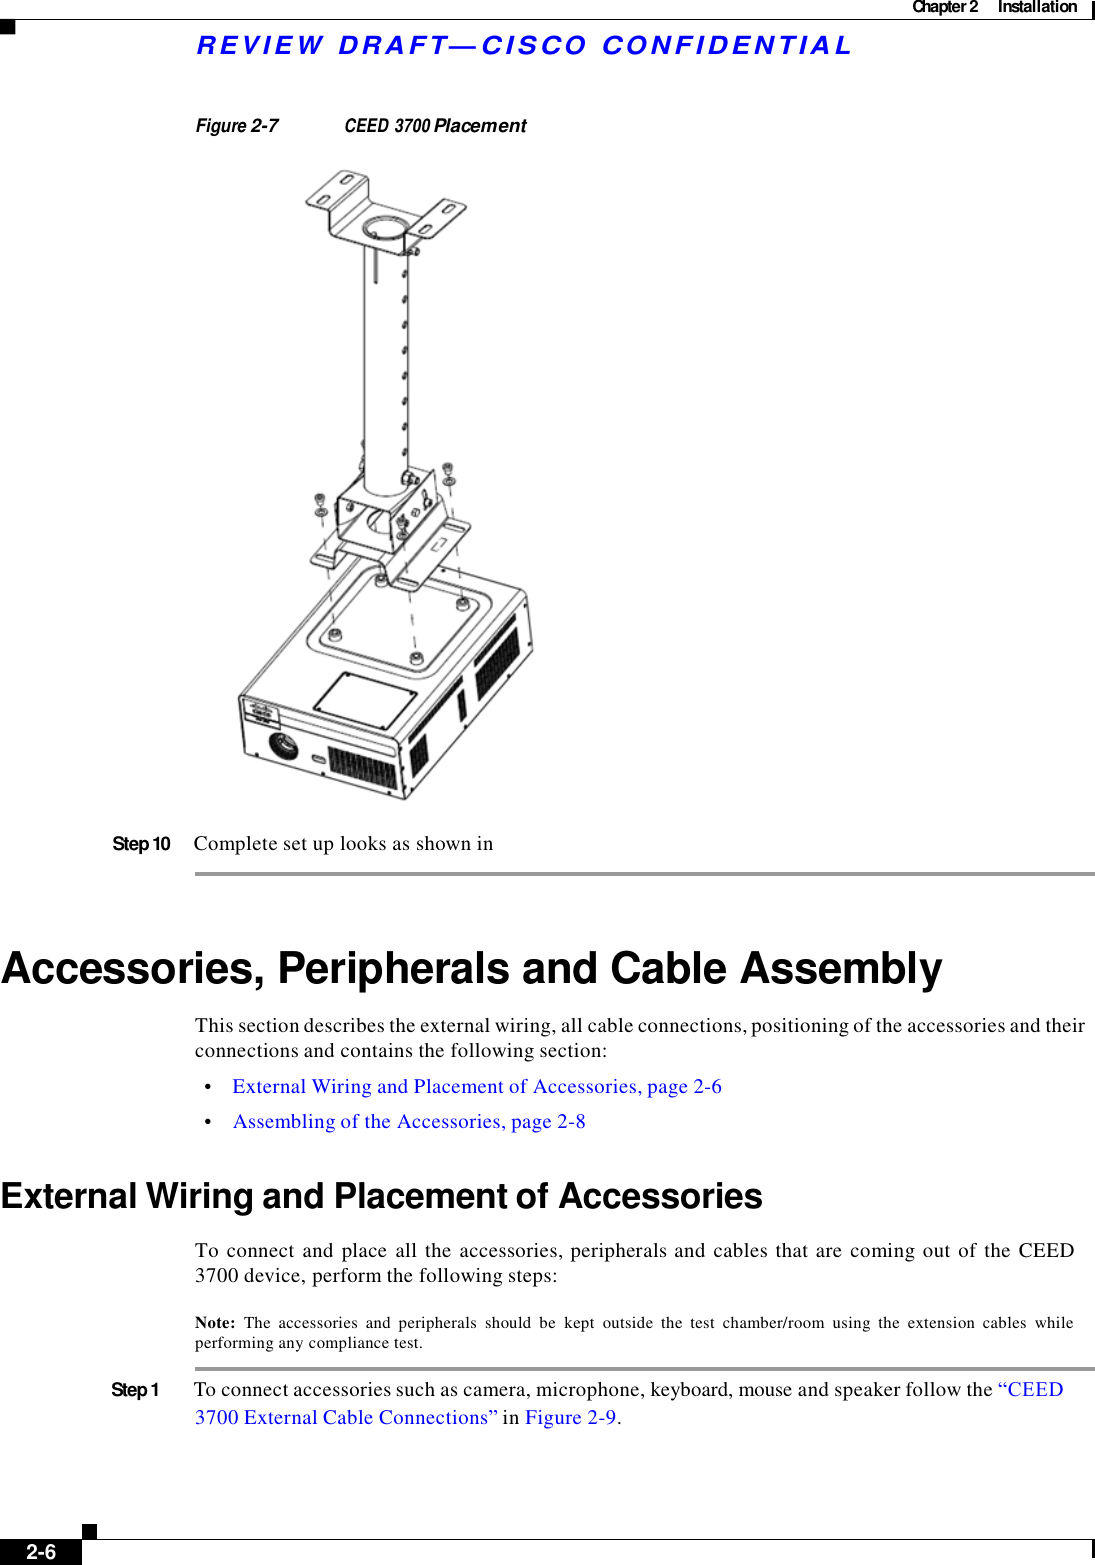 Chapter 2  Installation    R E V IE W  DRAFT— CISC O  C O N F ID E NT IA L    Figure 2-7 CEED 3700 Placement    Step 10  Complete set up looks as shown in     Accessories, Peripherals and Cable Assembly  This section describes the external wiring, all cable connections, positioning of the accessories and their connections and contains the following section:  •    External Wiring and Placement of Accessories, page 2-6  •    Assembling of the Accessories, page 2-8   External Wiring and Placement of Accessories  To connect and place all the  accessories, peripherals and cables that are  coming out of  the  CEED 3700 device, perform the following steps:  Note:  The  accessories  and  peripherals  should  be  kept  outside  the  test  chamber/room  using  the  extension  cables  while performing any compliance test.  Step 1  To connect accessories such as camera, microphone, keyboard, mouse and speaker follow the “CEED    3700 External Cable Connections” in Figure 2-9.         2-6   